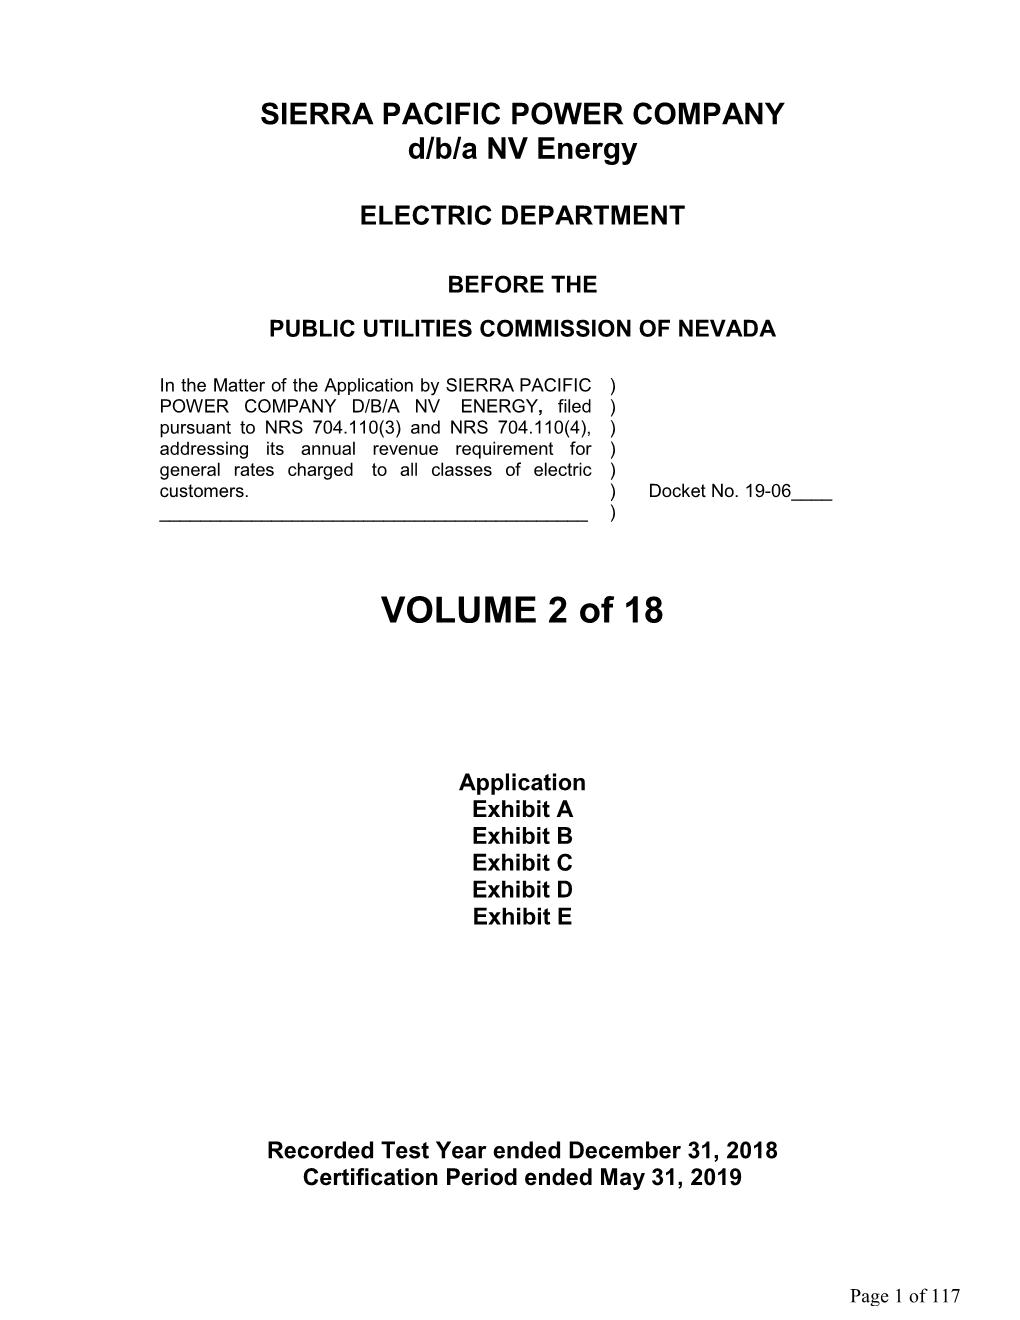 (SPPC) 2019 Electric General Rate Case Volume 2